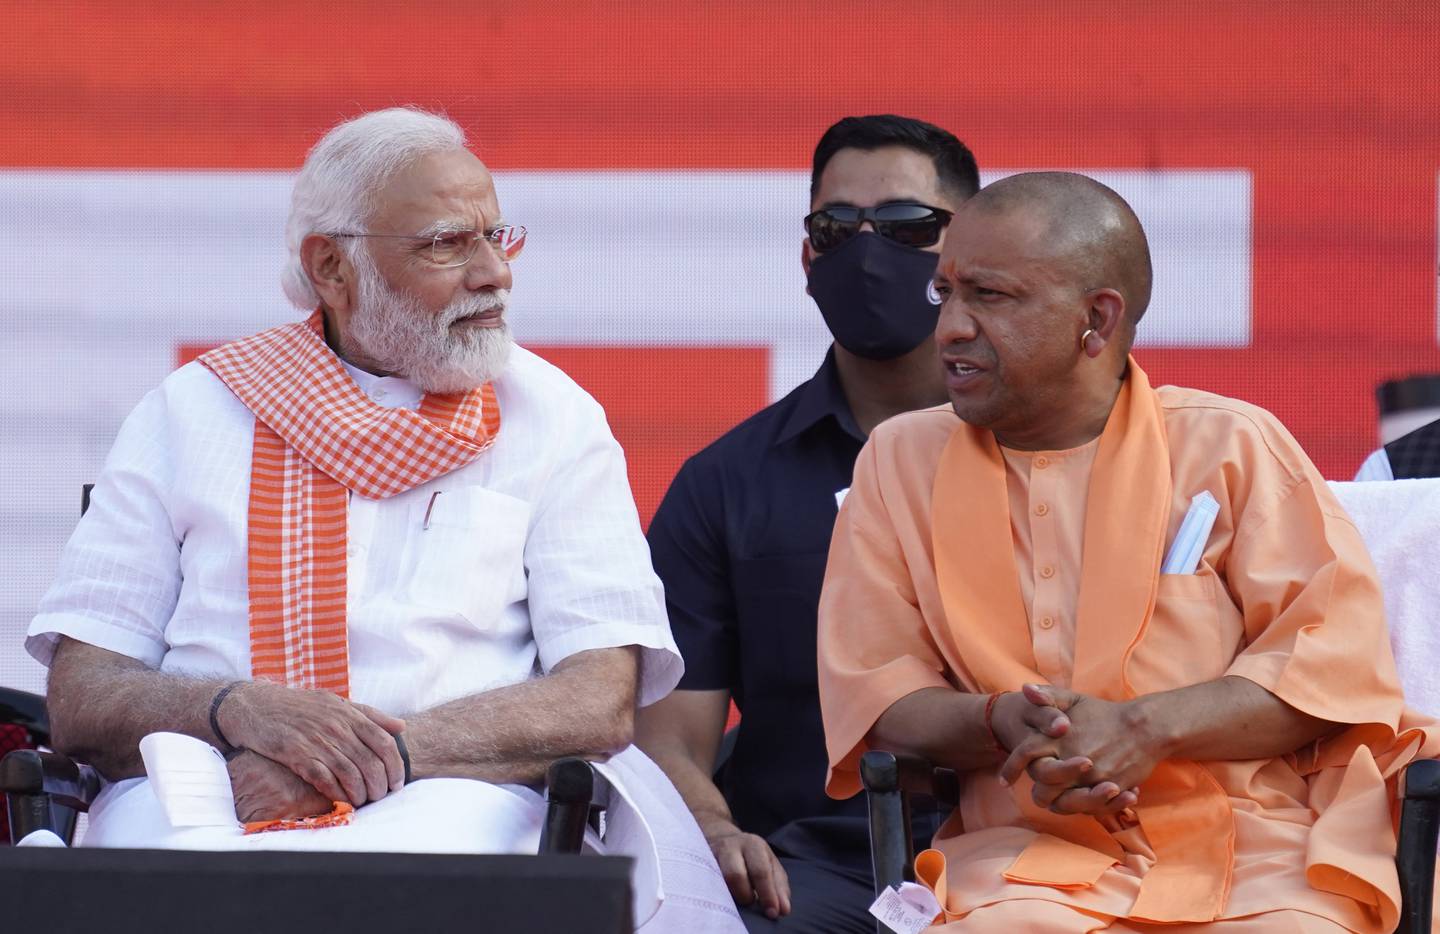 Indian Prime Minister Narendra Modi speaks with Yogi Adityanath during the swearing-in-ceremony of the latter as the Chief Minister of Uttar Pradesh state in Lucknow, India. Friday, March 25, 2022. (AP Photo/Rajesh Kumar Singh)